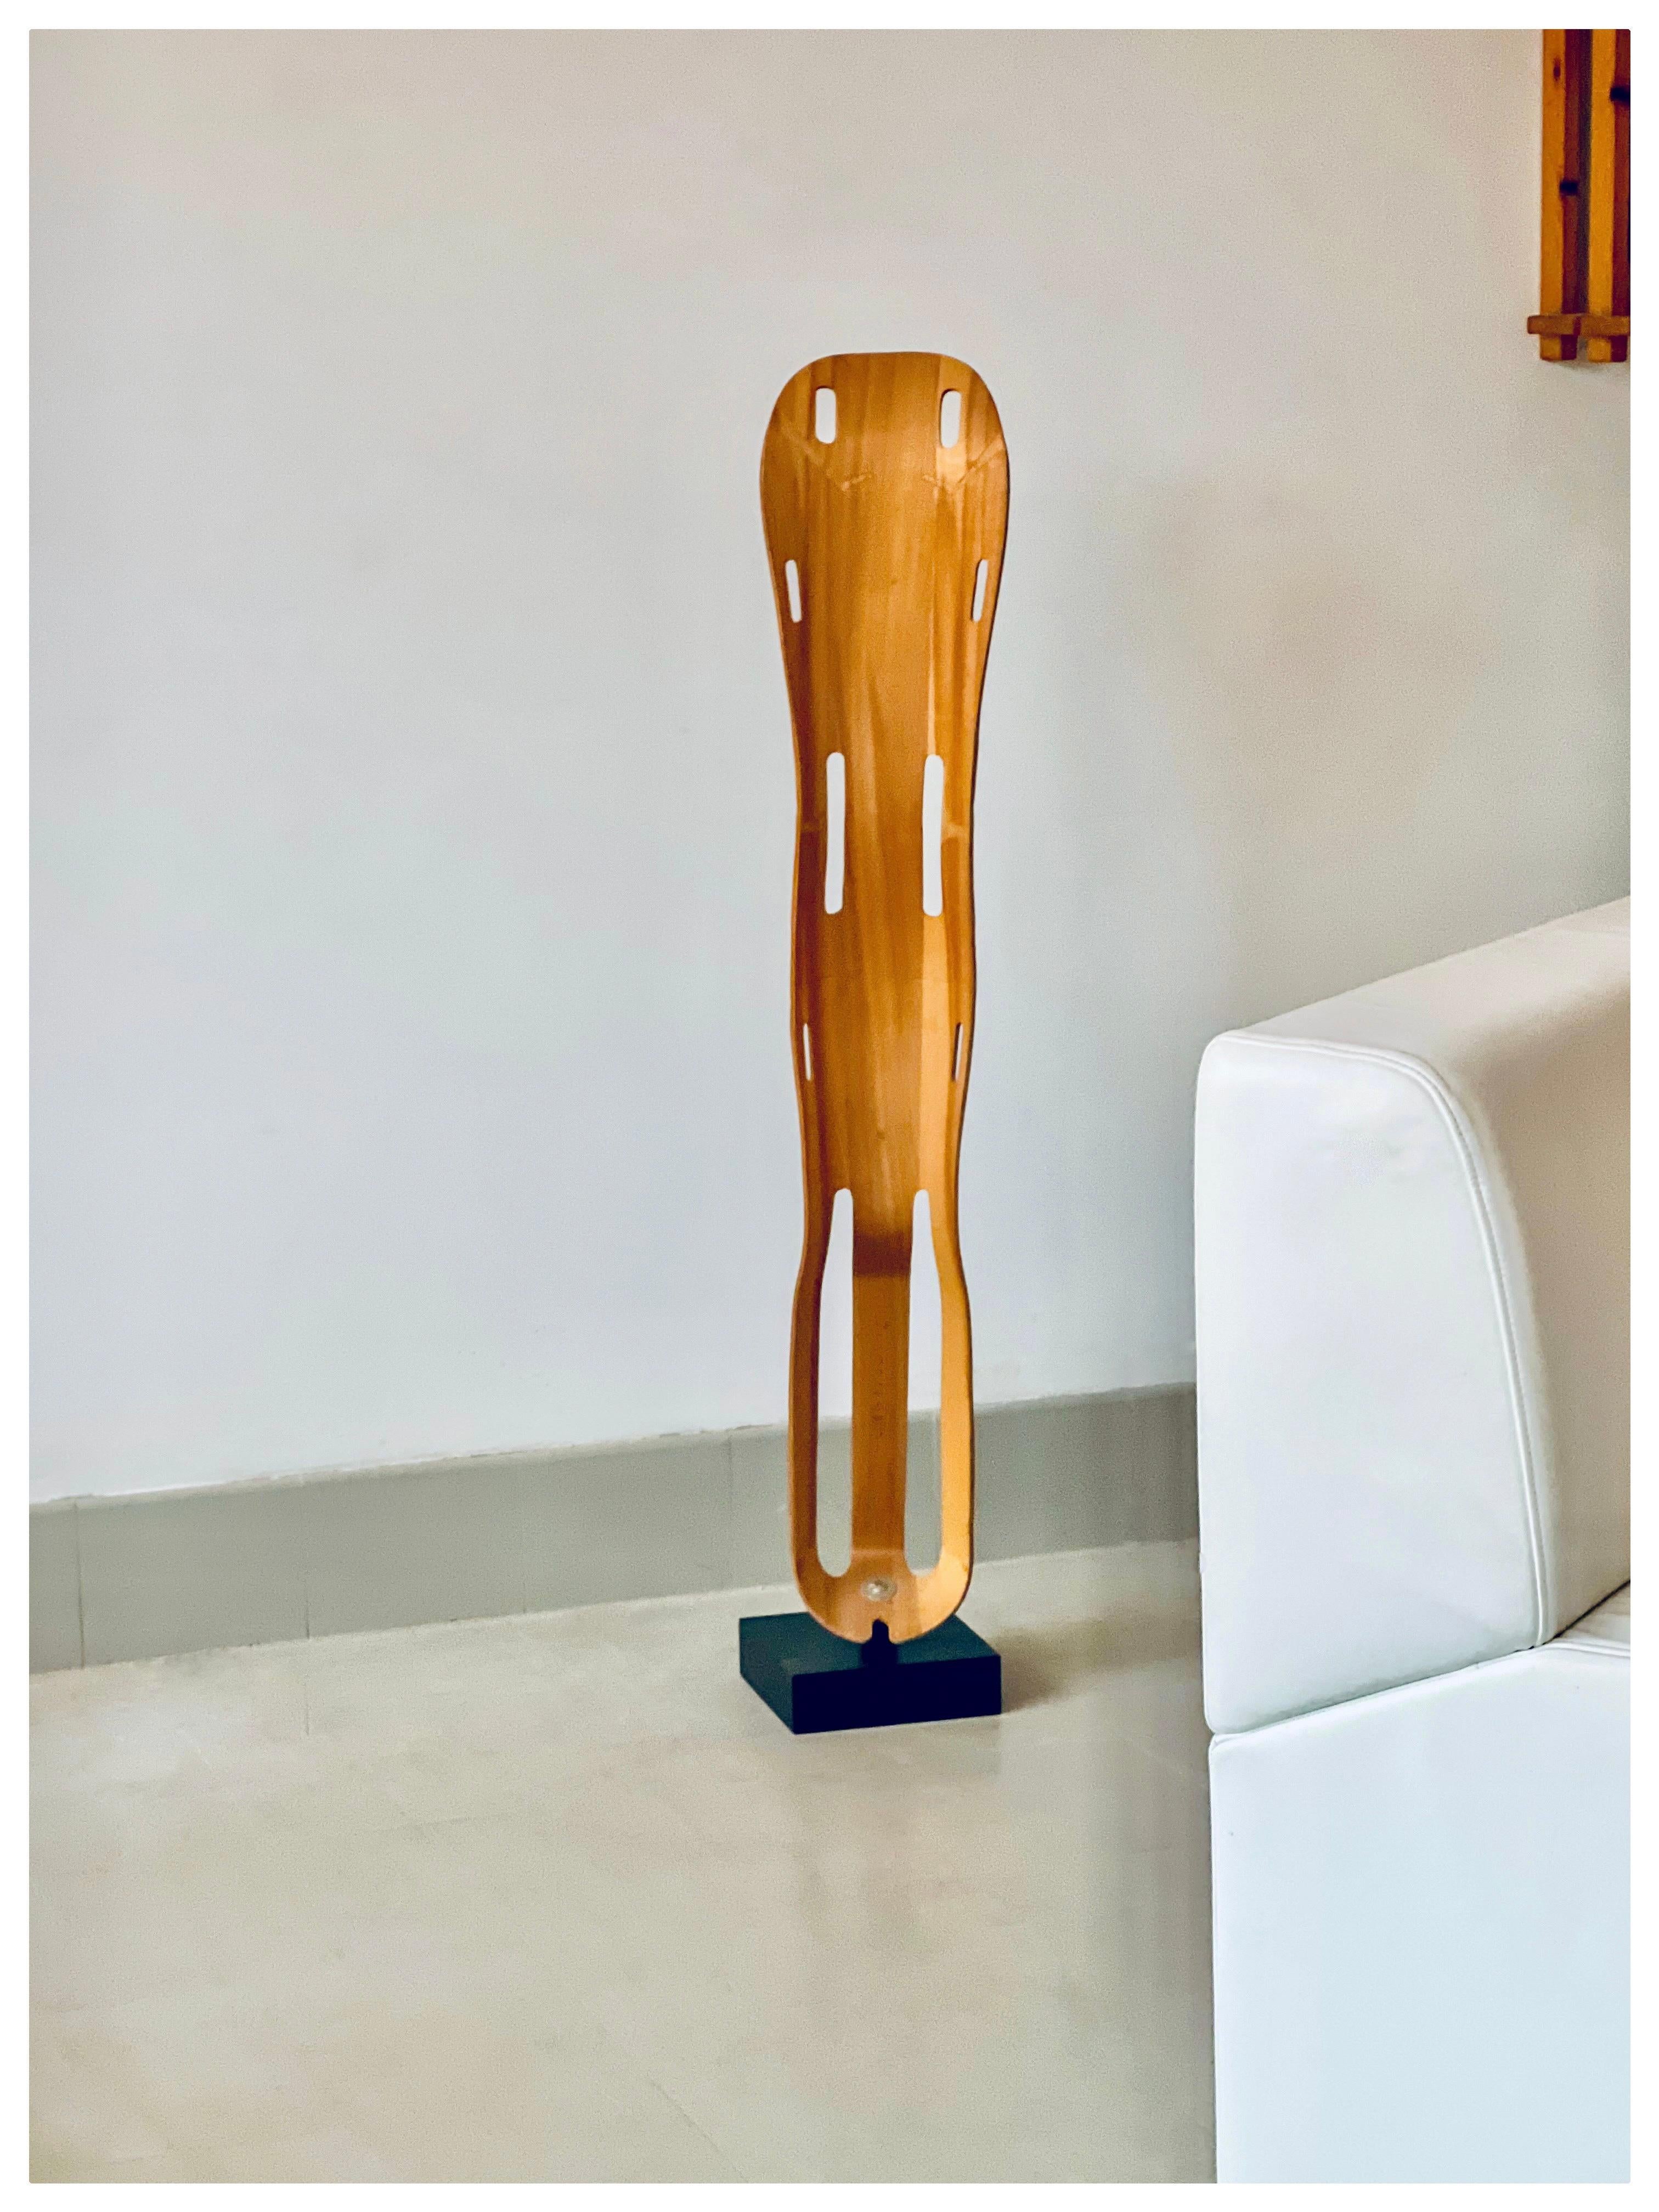 Before Charles & Ray Eames made their name with modernist chairs, they perfected the molding of plywood with a military leg splint for World War II. 
This iconic piece of history is sculpturally crafted in one piece using molded plywood and birch